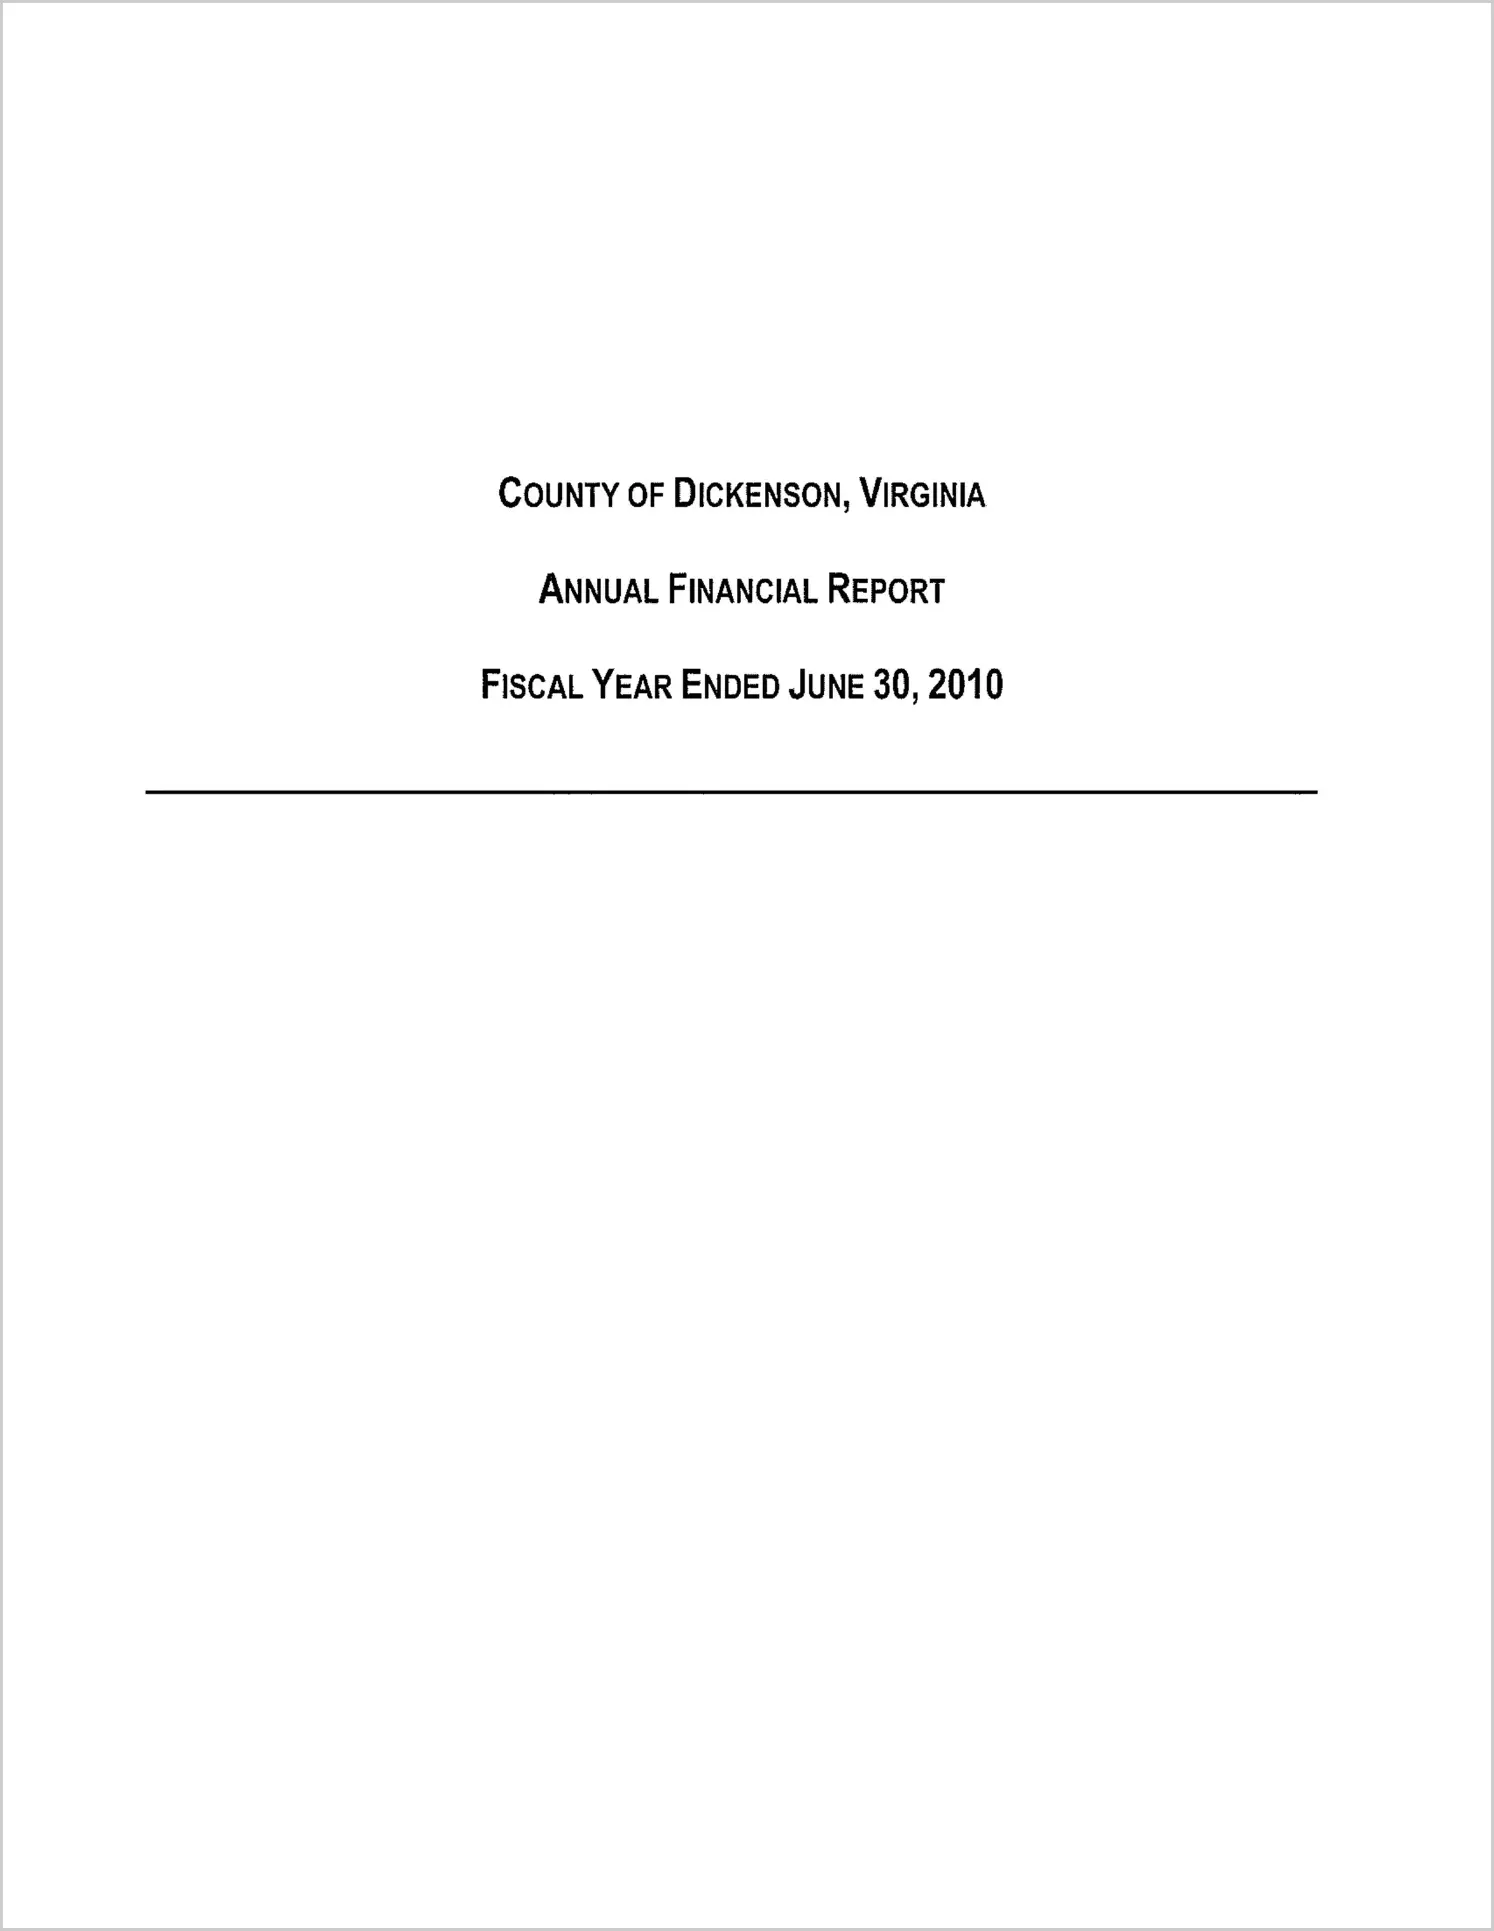 2010 Annual Financial Report for County of Dickenson